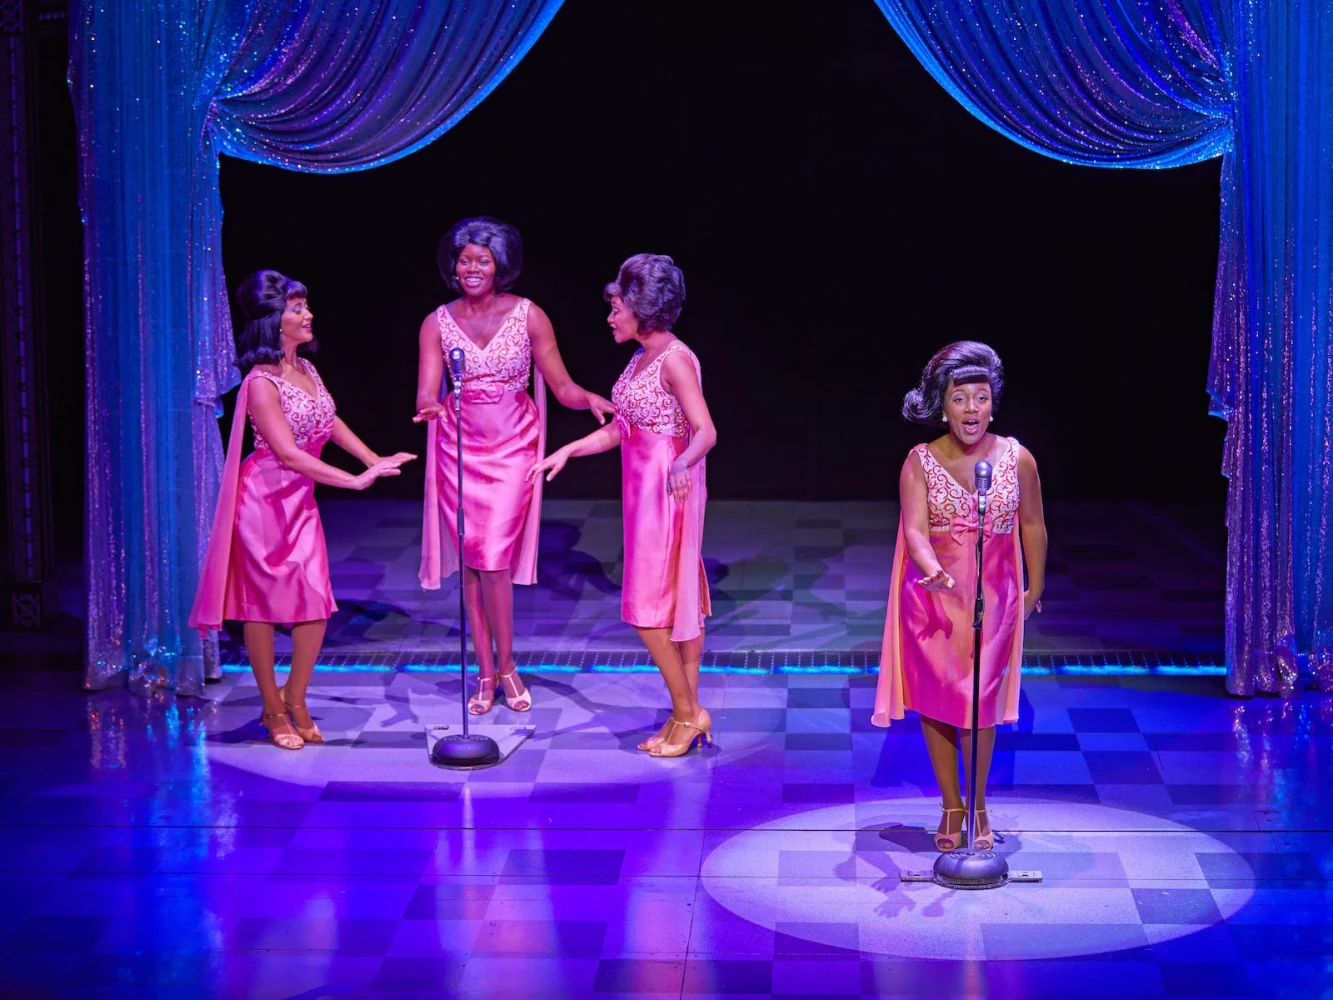 Beautiful - The Carole King Musical: What to expect - 6